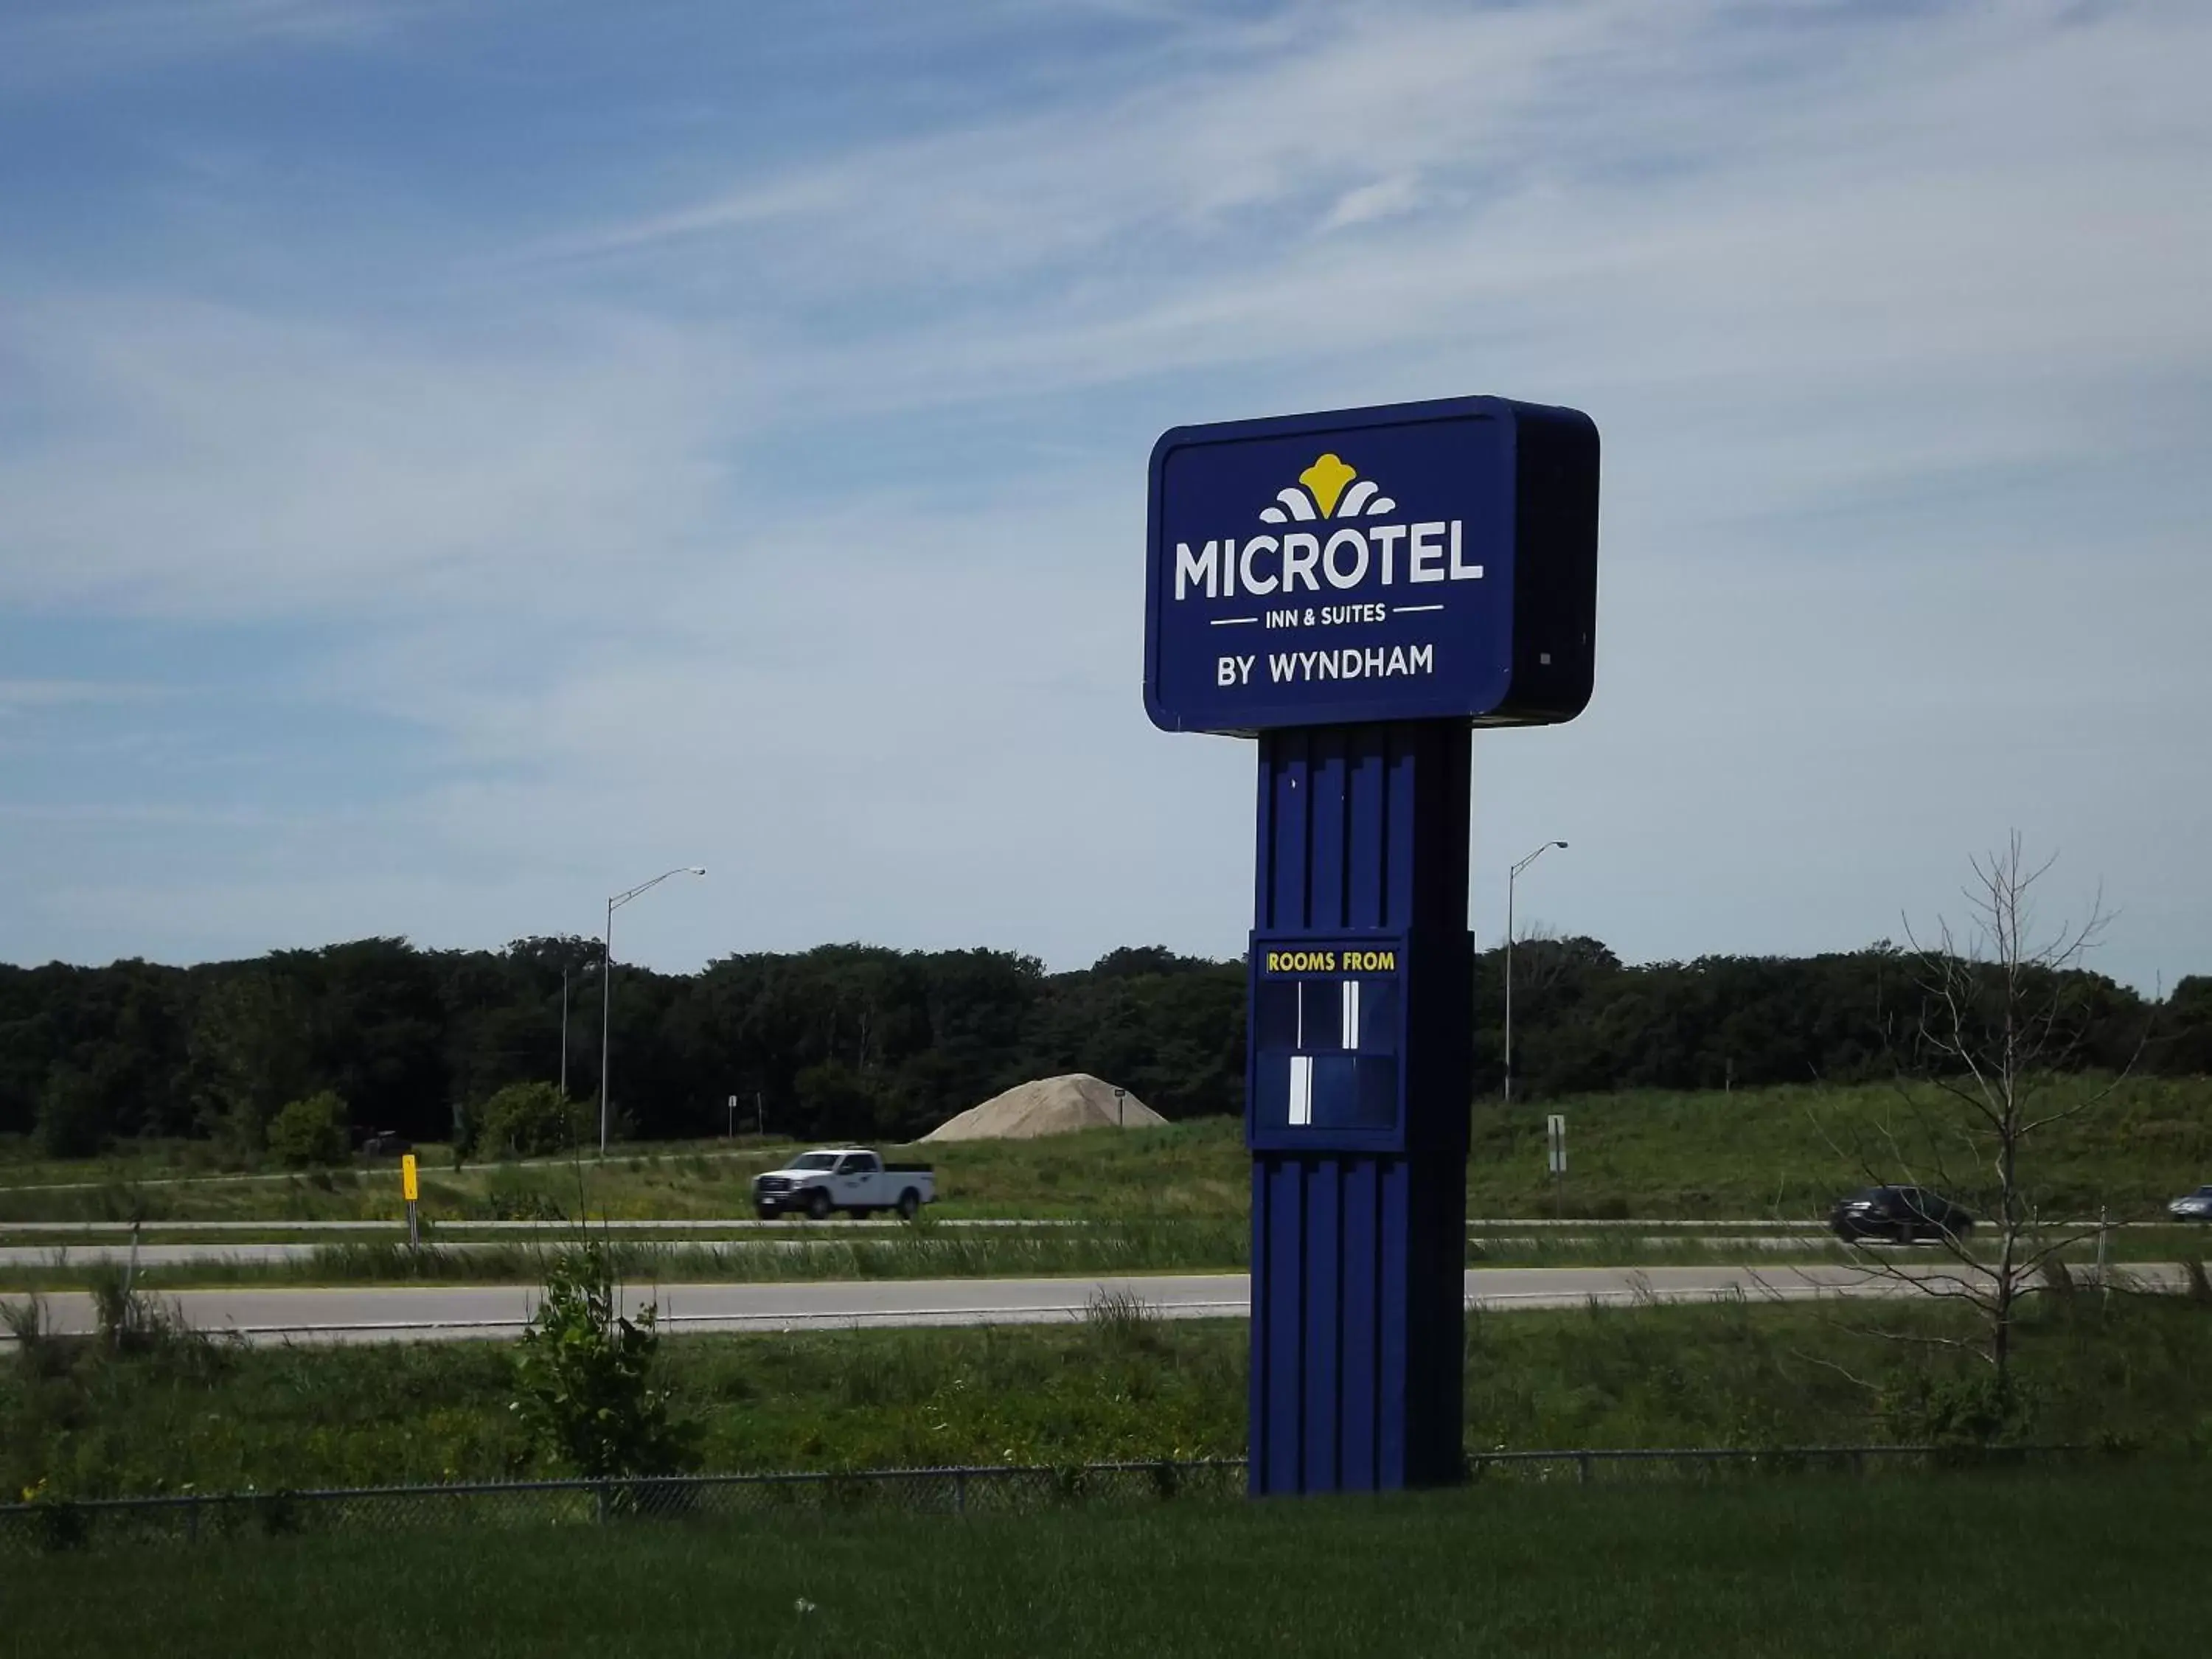 Property building in MICROTEL Inn and Suites - Ames